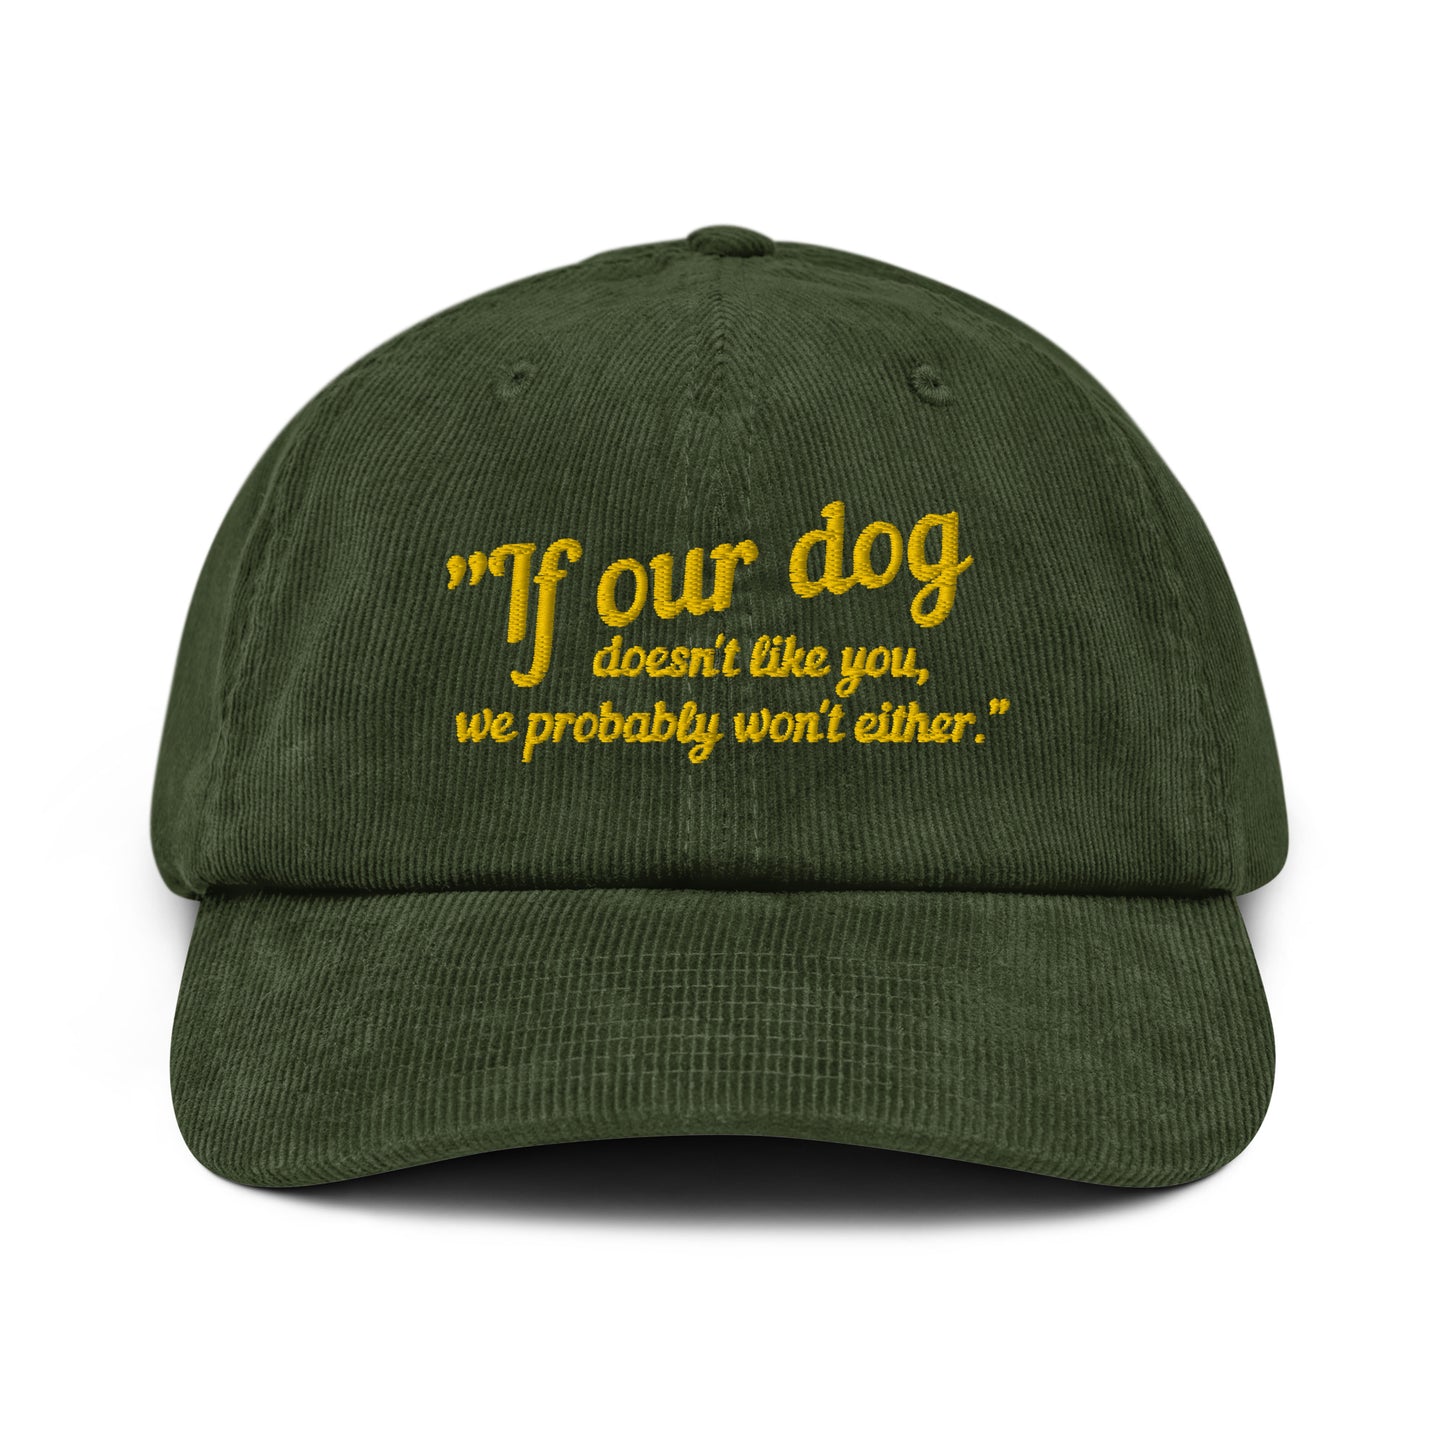 If Our Dog Doesn't Lile You Corduroy hat